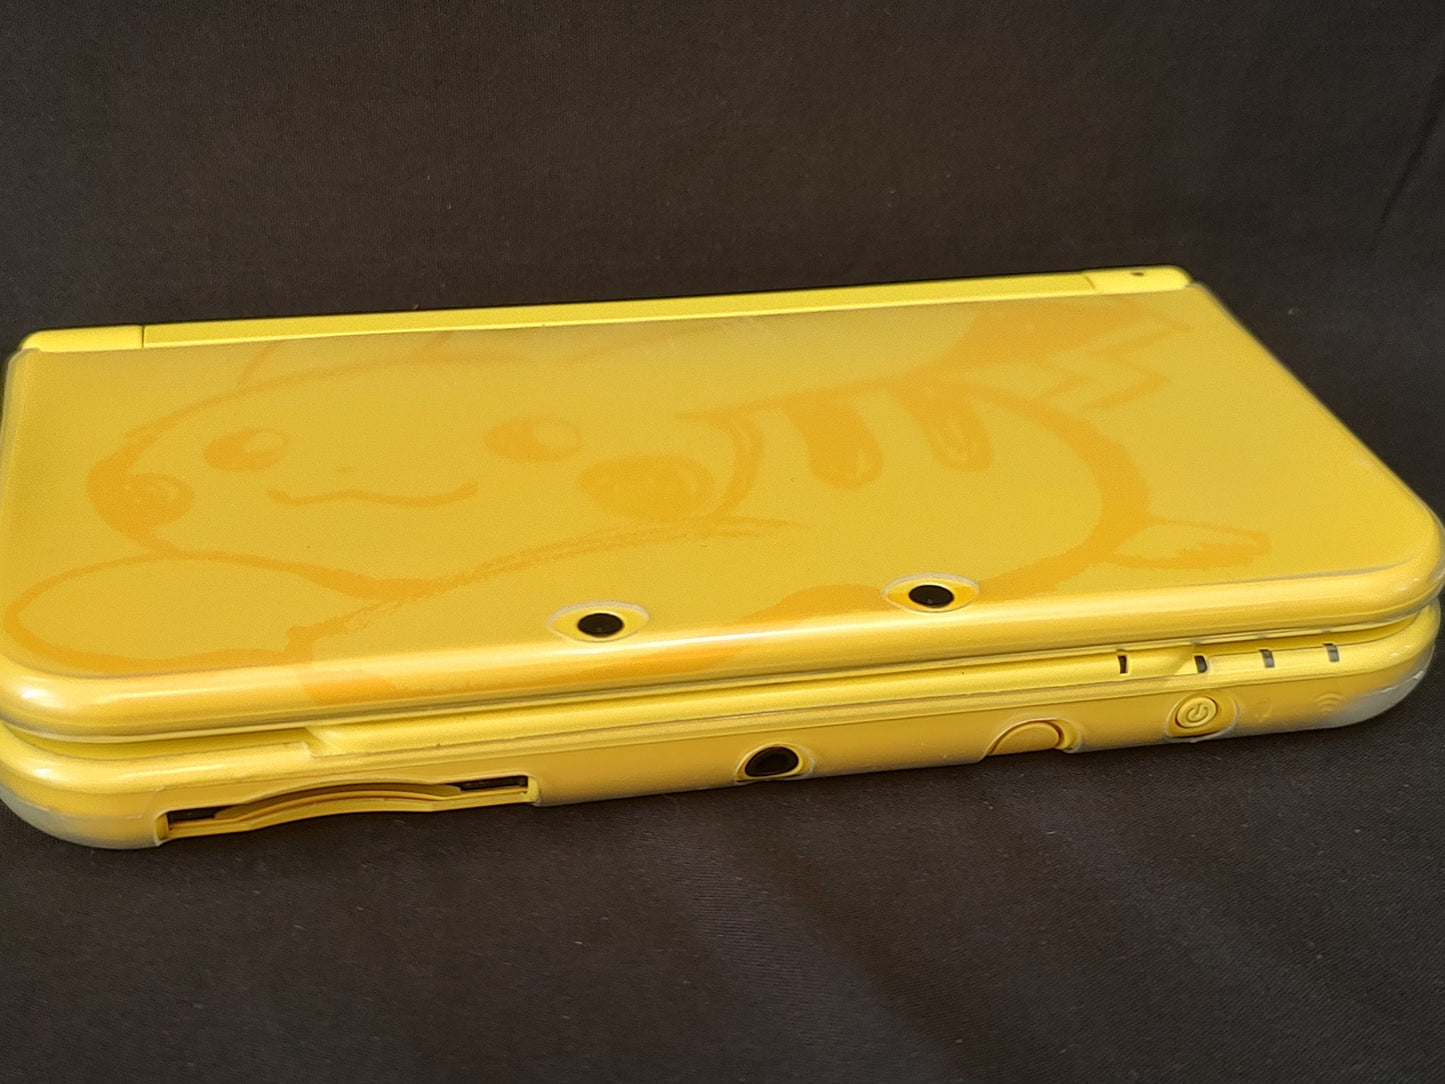 Used, New 3DS XL Yellow Pokemon Pikachu Limited Japan Edition, Working-g0304-